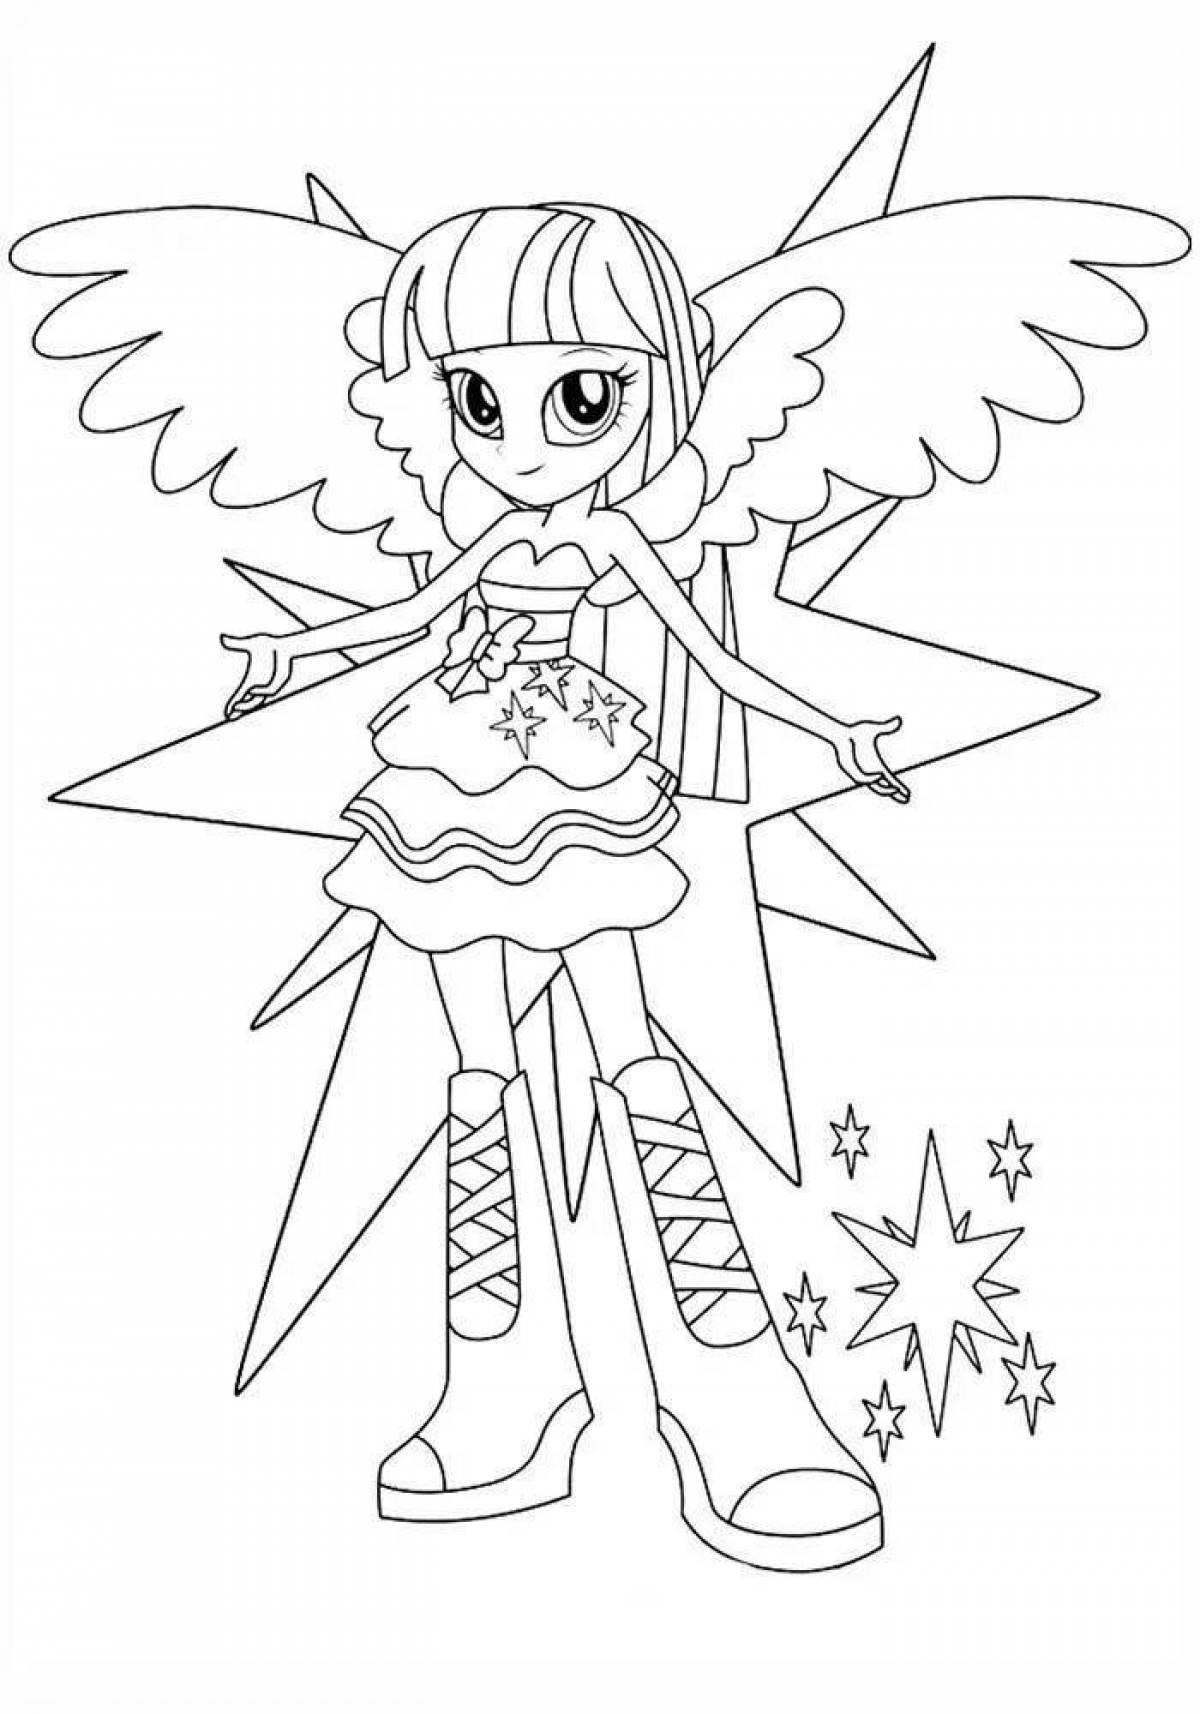 Glittering Twilight Sparkle Coloring Page